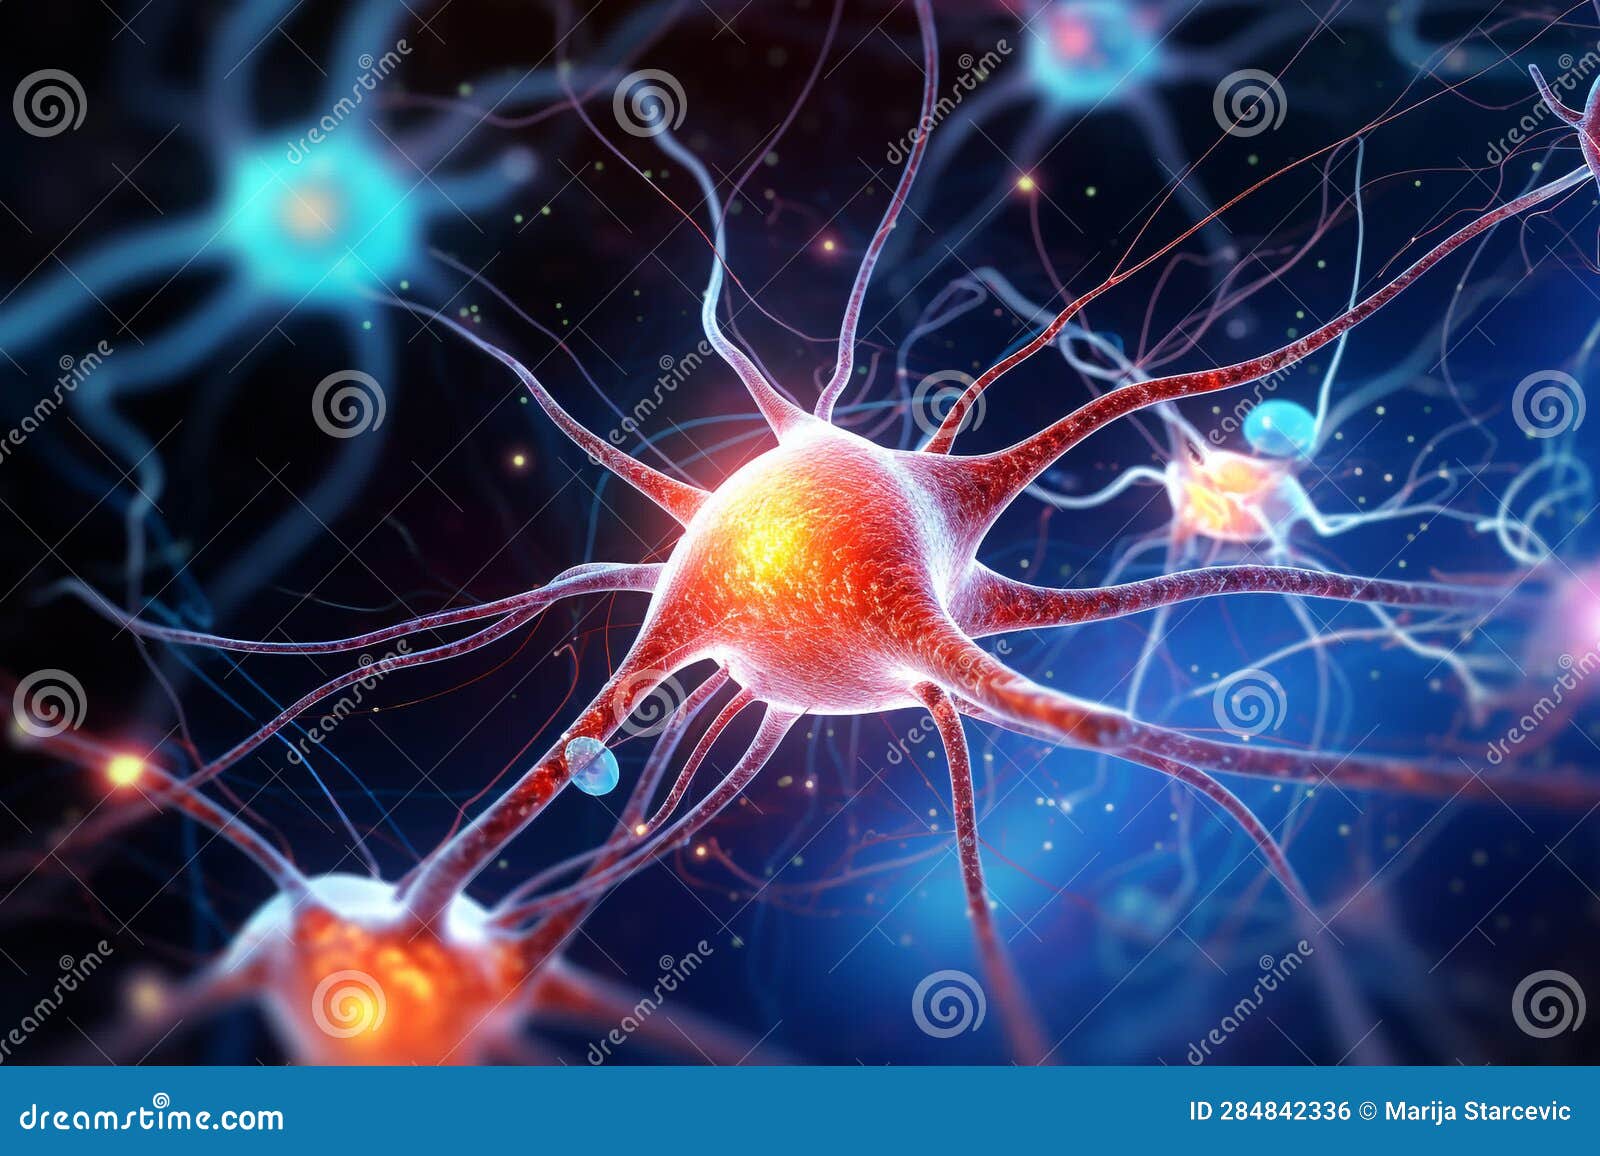 Active Nerve Cells.Human Brain Stimulation or Activity with Neuron ...